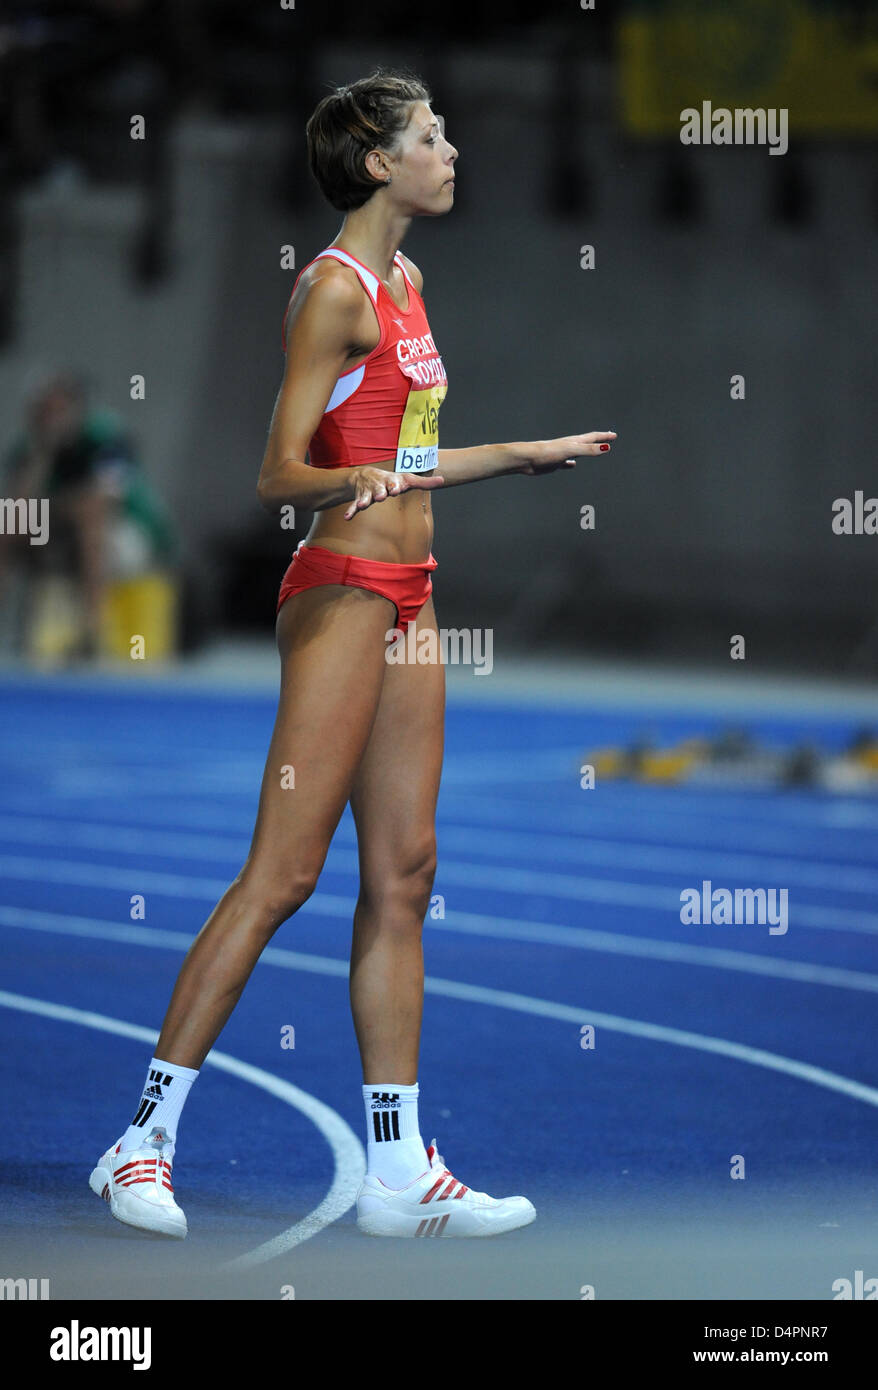 Croatian athlete Blanka Vlasic pictured in the High Jump final at the 12th IAAF World Championships in Athletics, Berlin, Germany, 20 August 2009. Photo: Bernd Thissen Stock Photo